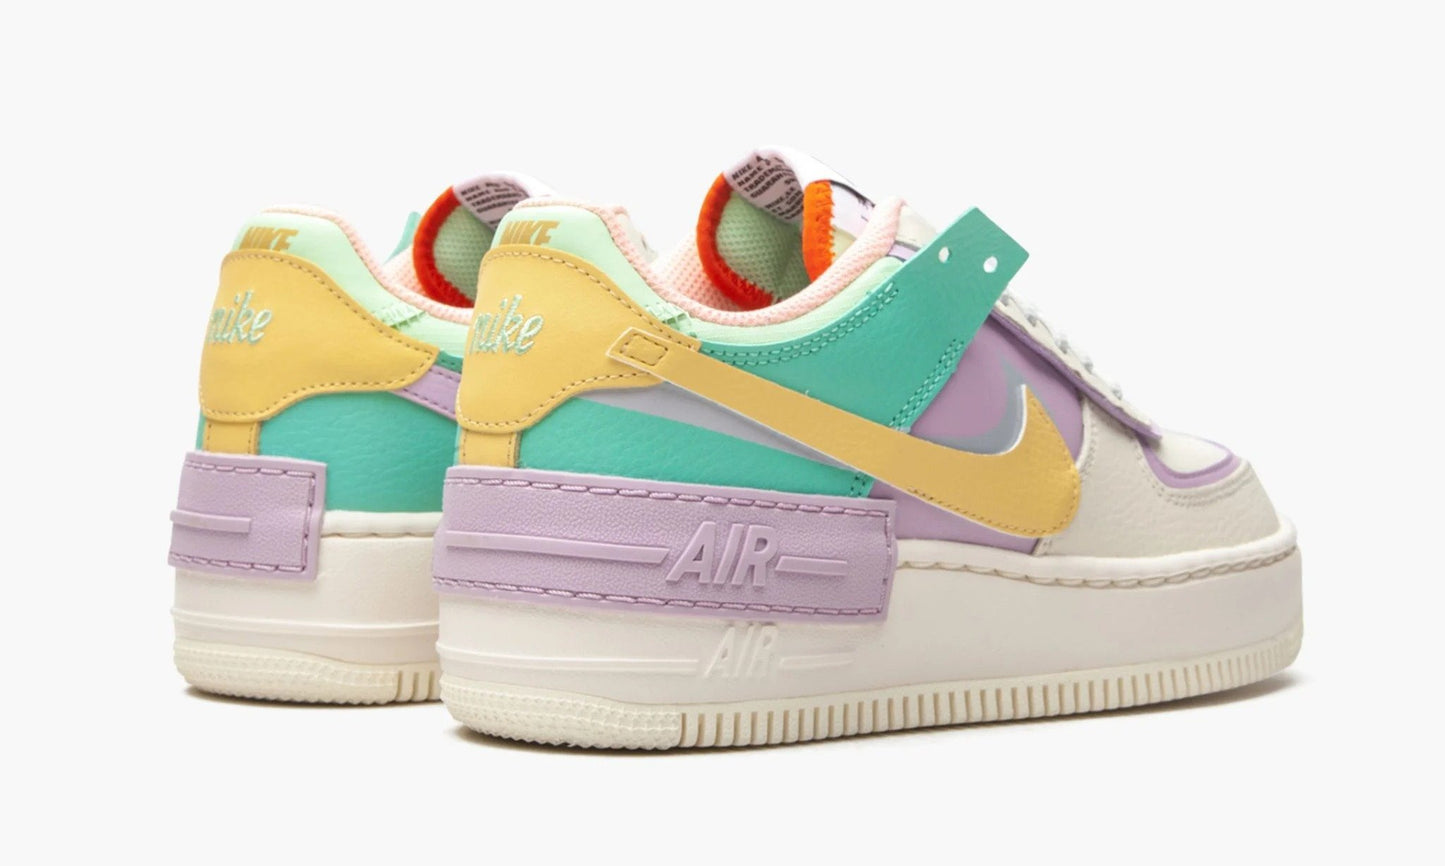 Force 1 Low Shadow WMNS “Pale Ivory / Pastel Multicolor”